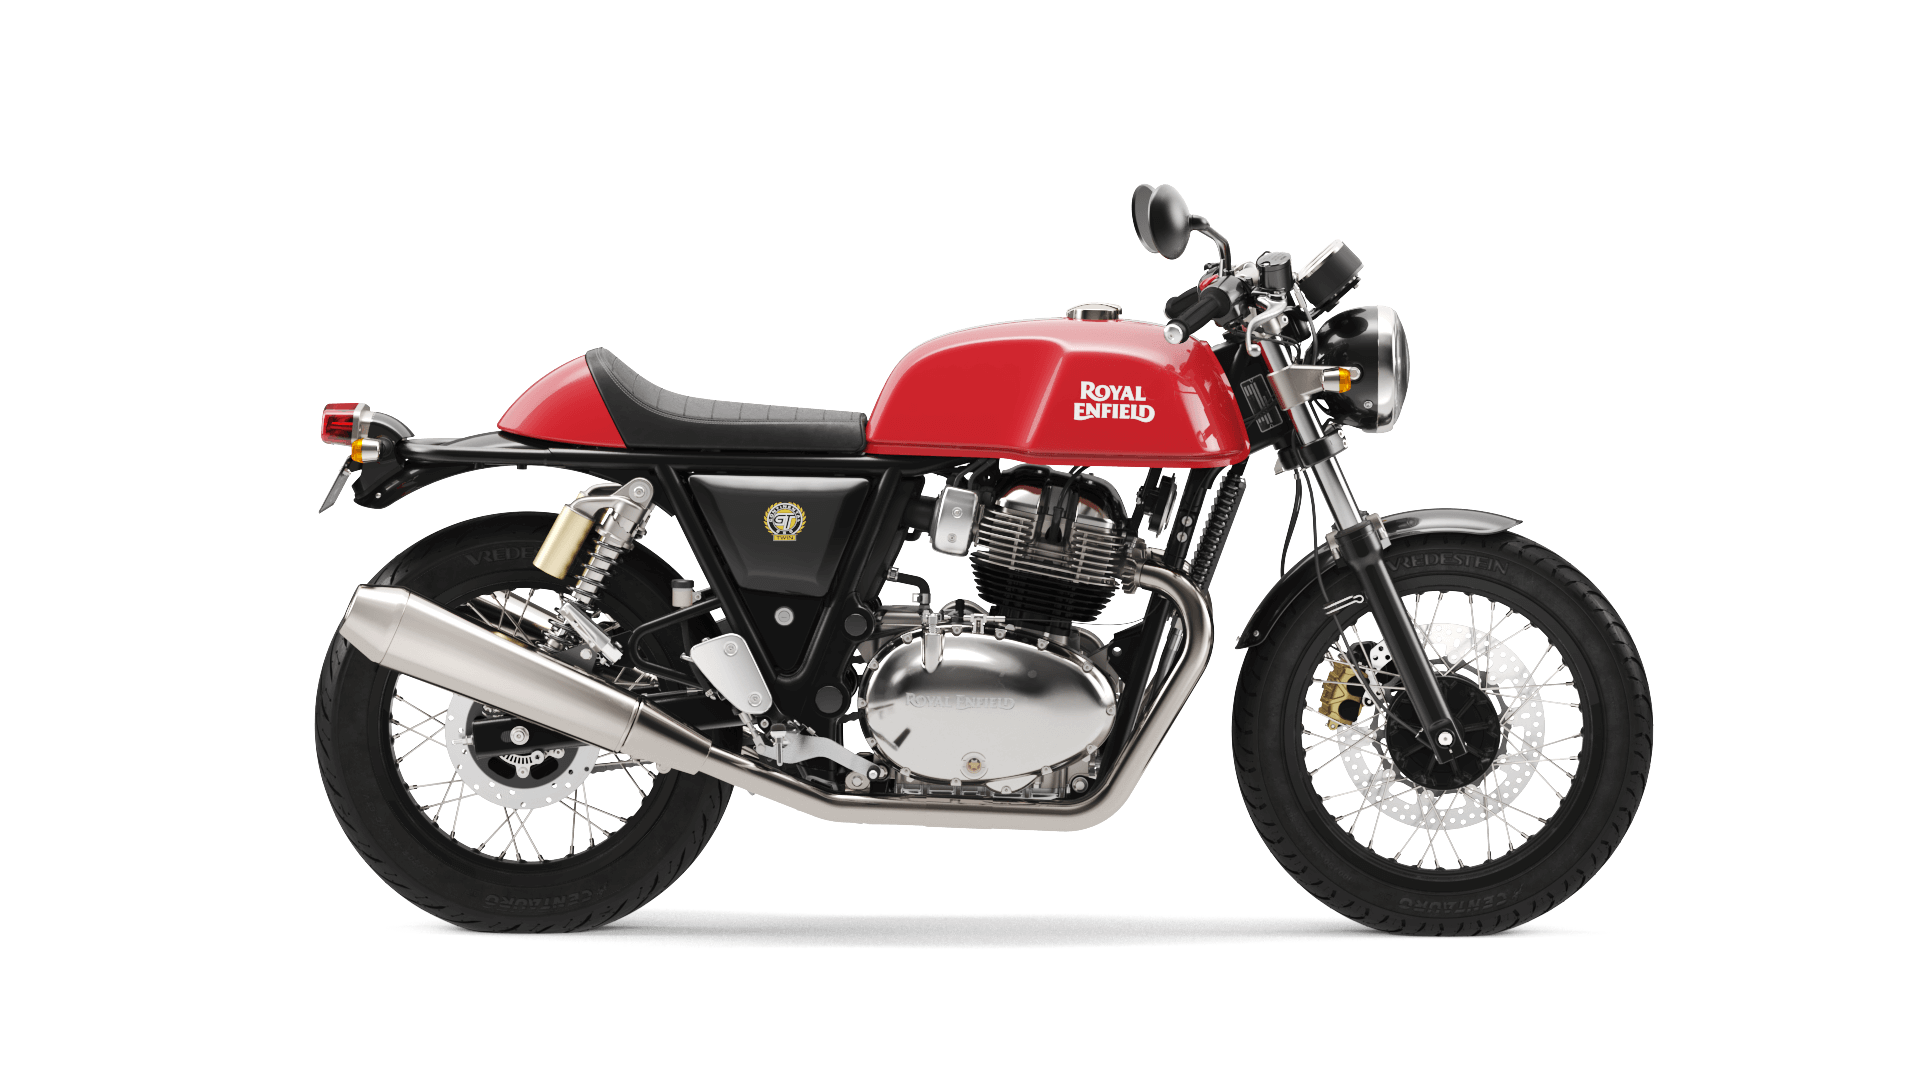 Continental GT 650 Price, Colors & Specification in USA